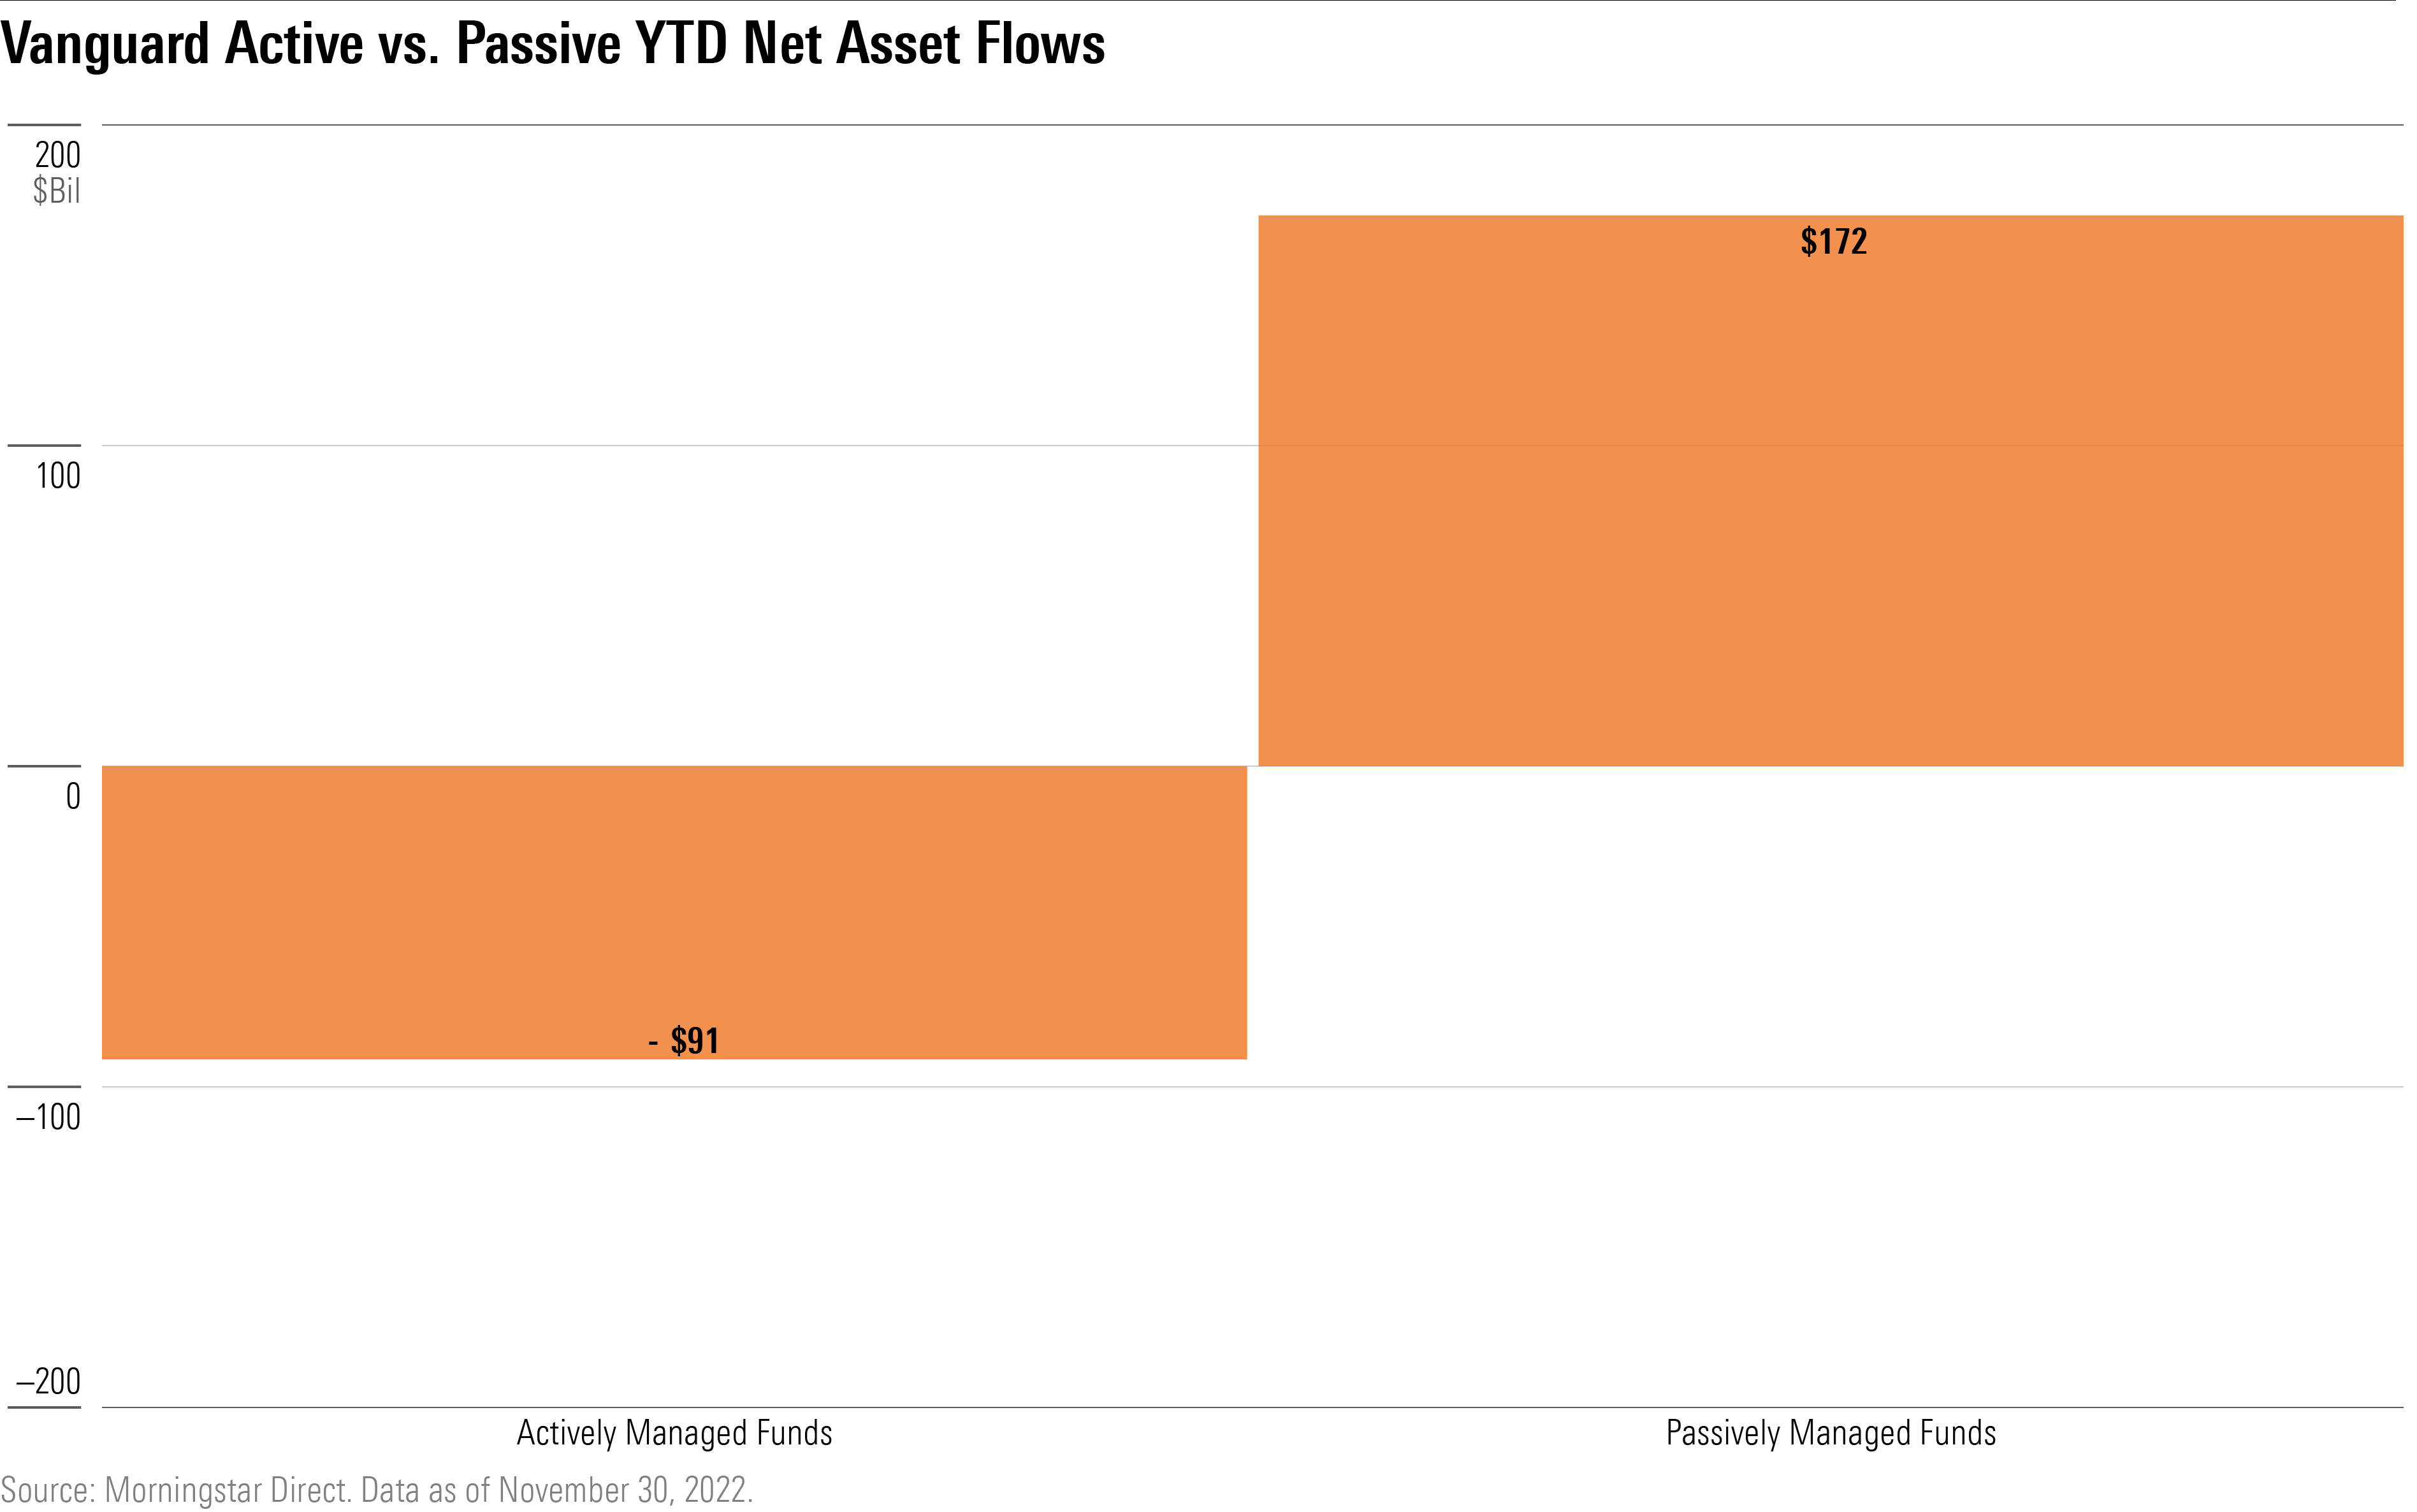 A bar chart showing active and passive flows into Vanguard mutual funds and exchange-traded funds.